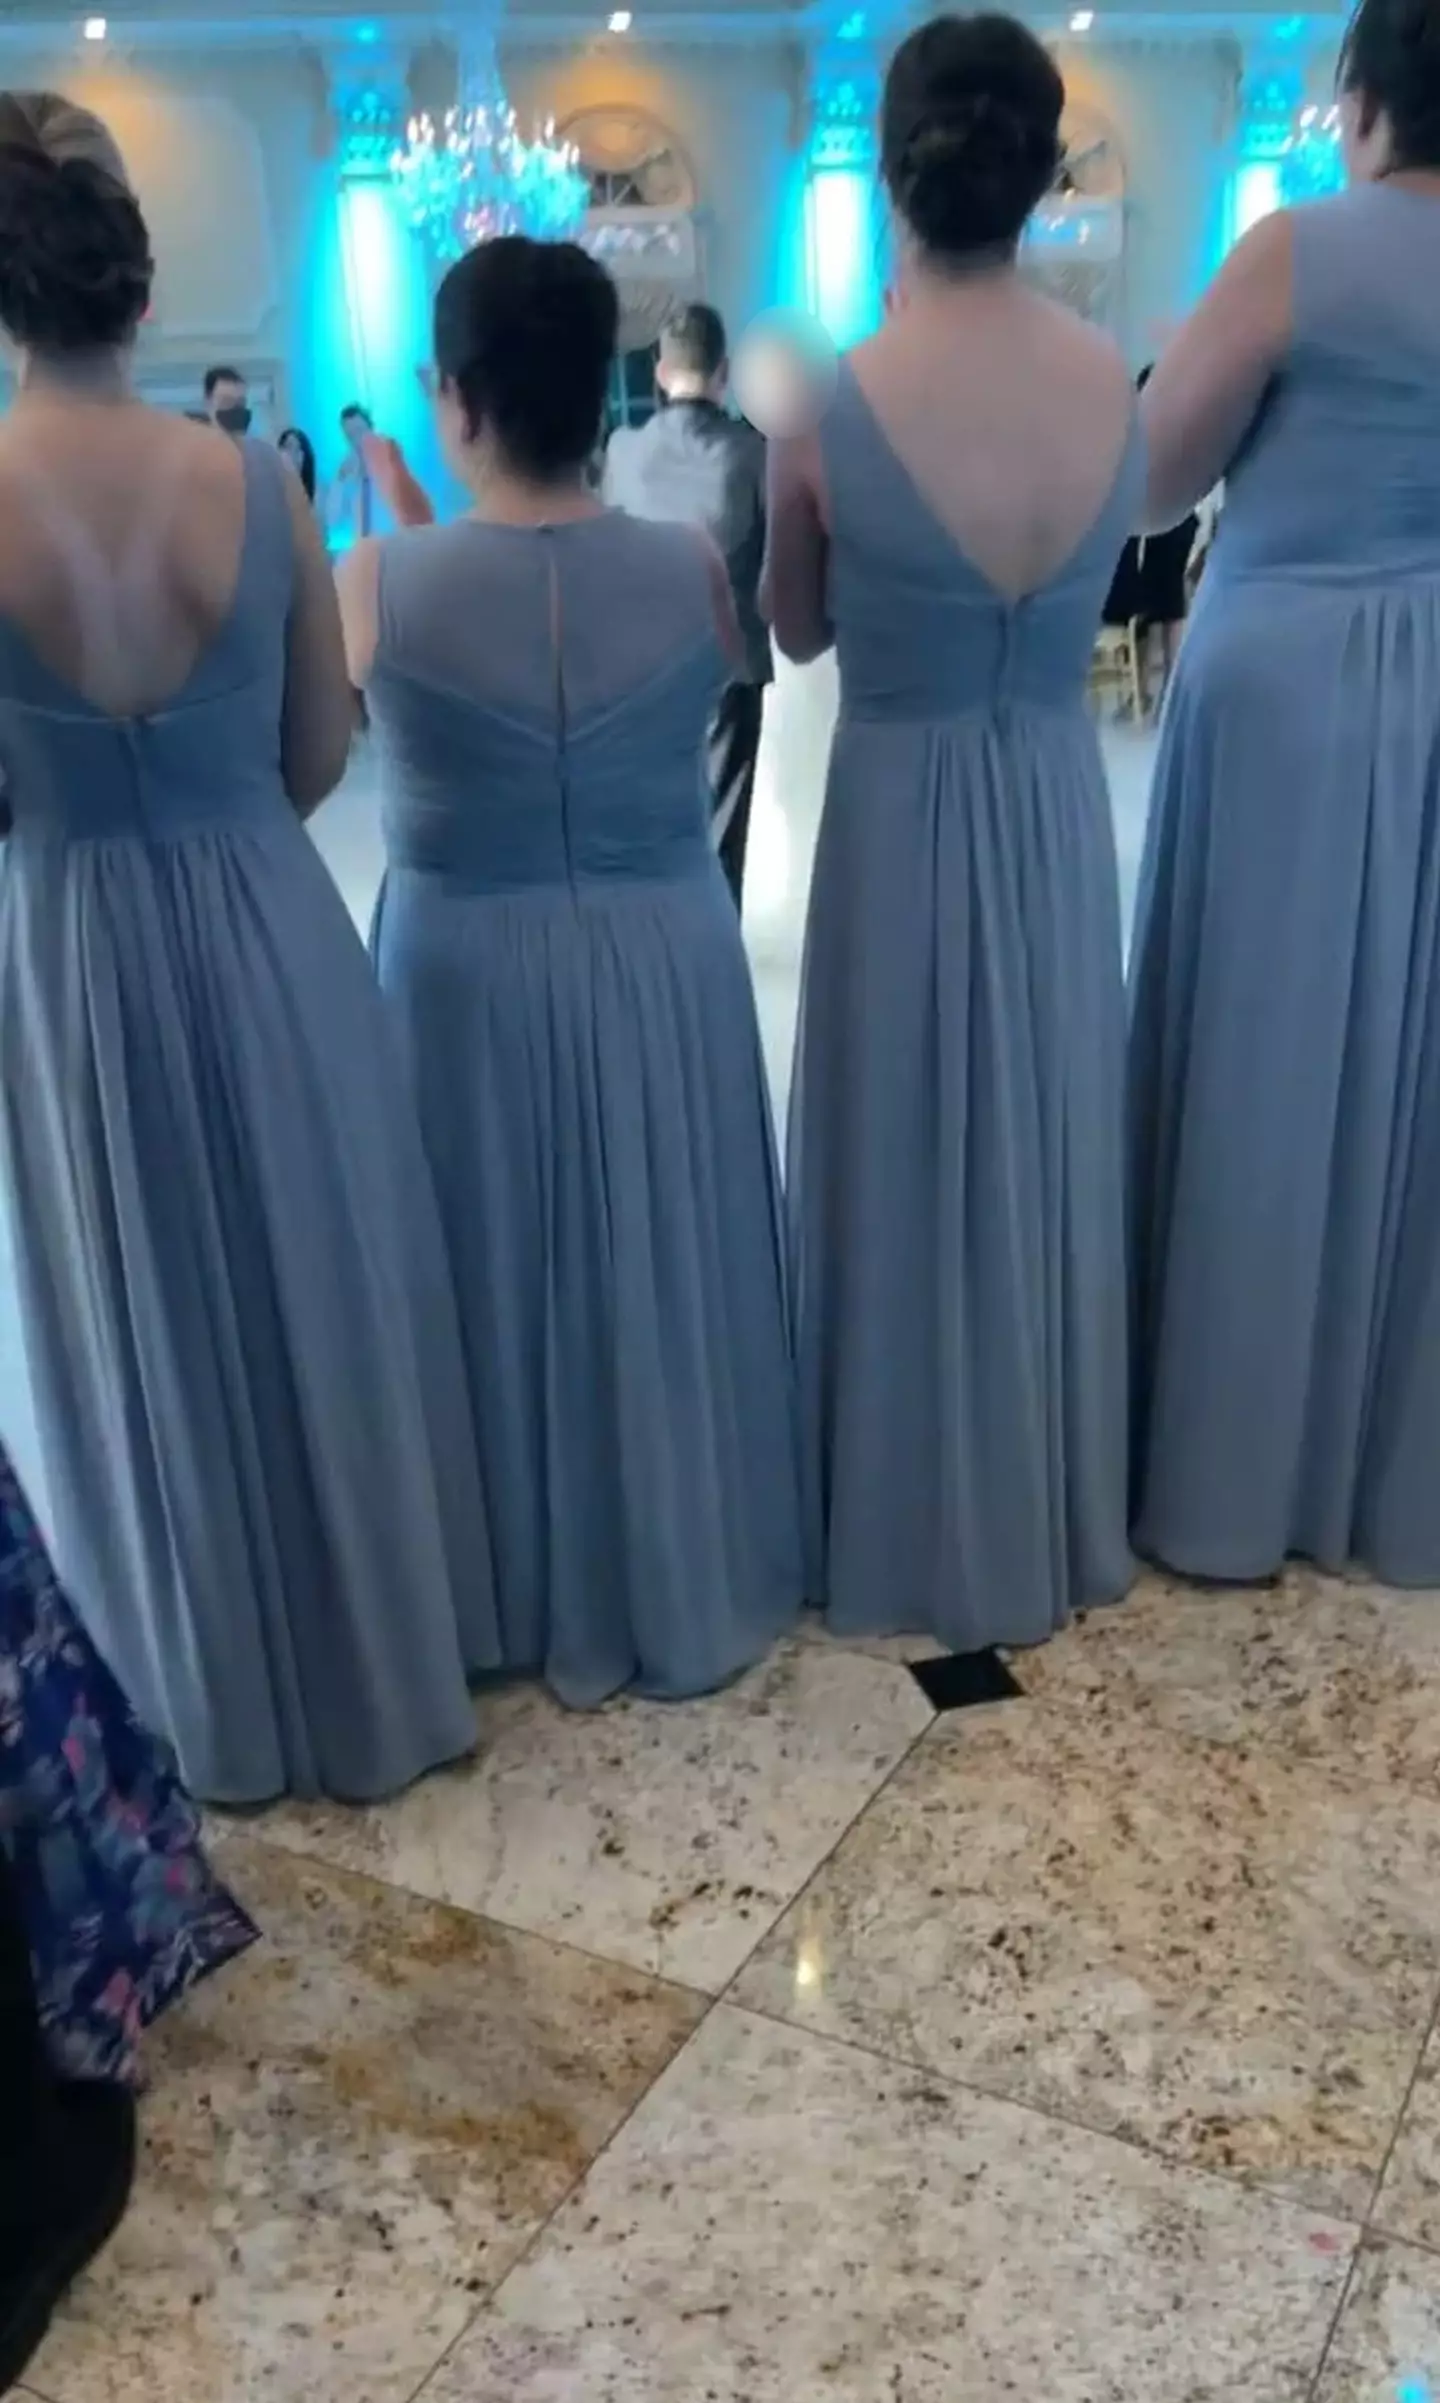 Unfortunately, she was the same dress as the bridesmaids.